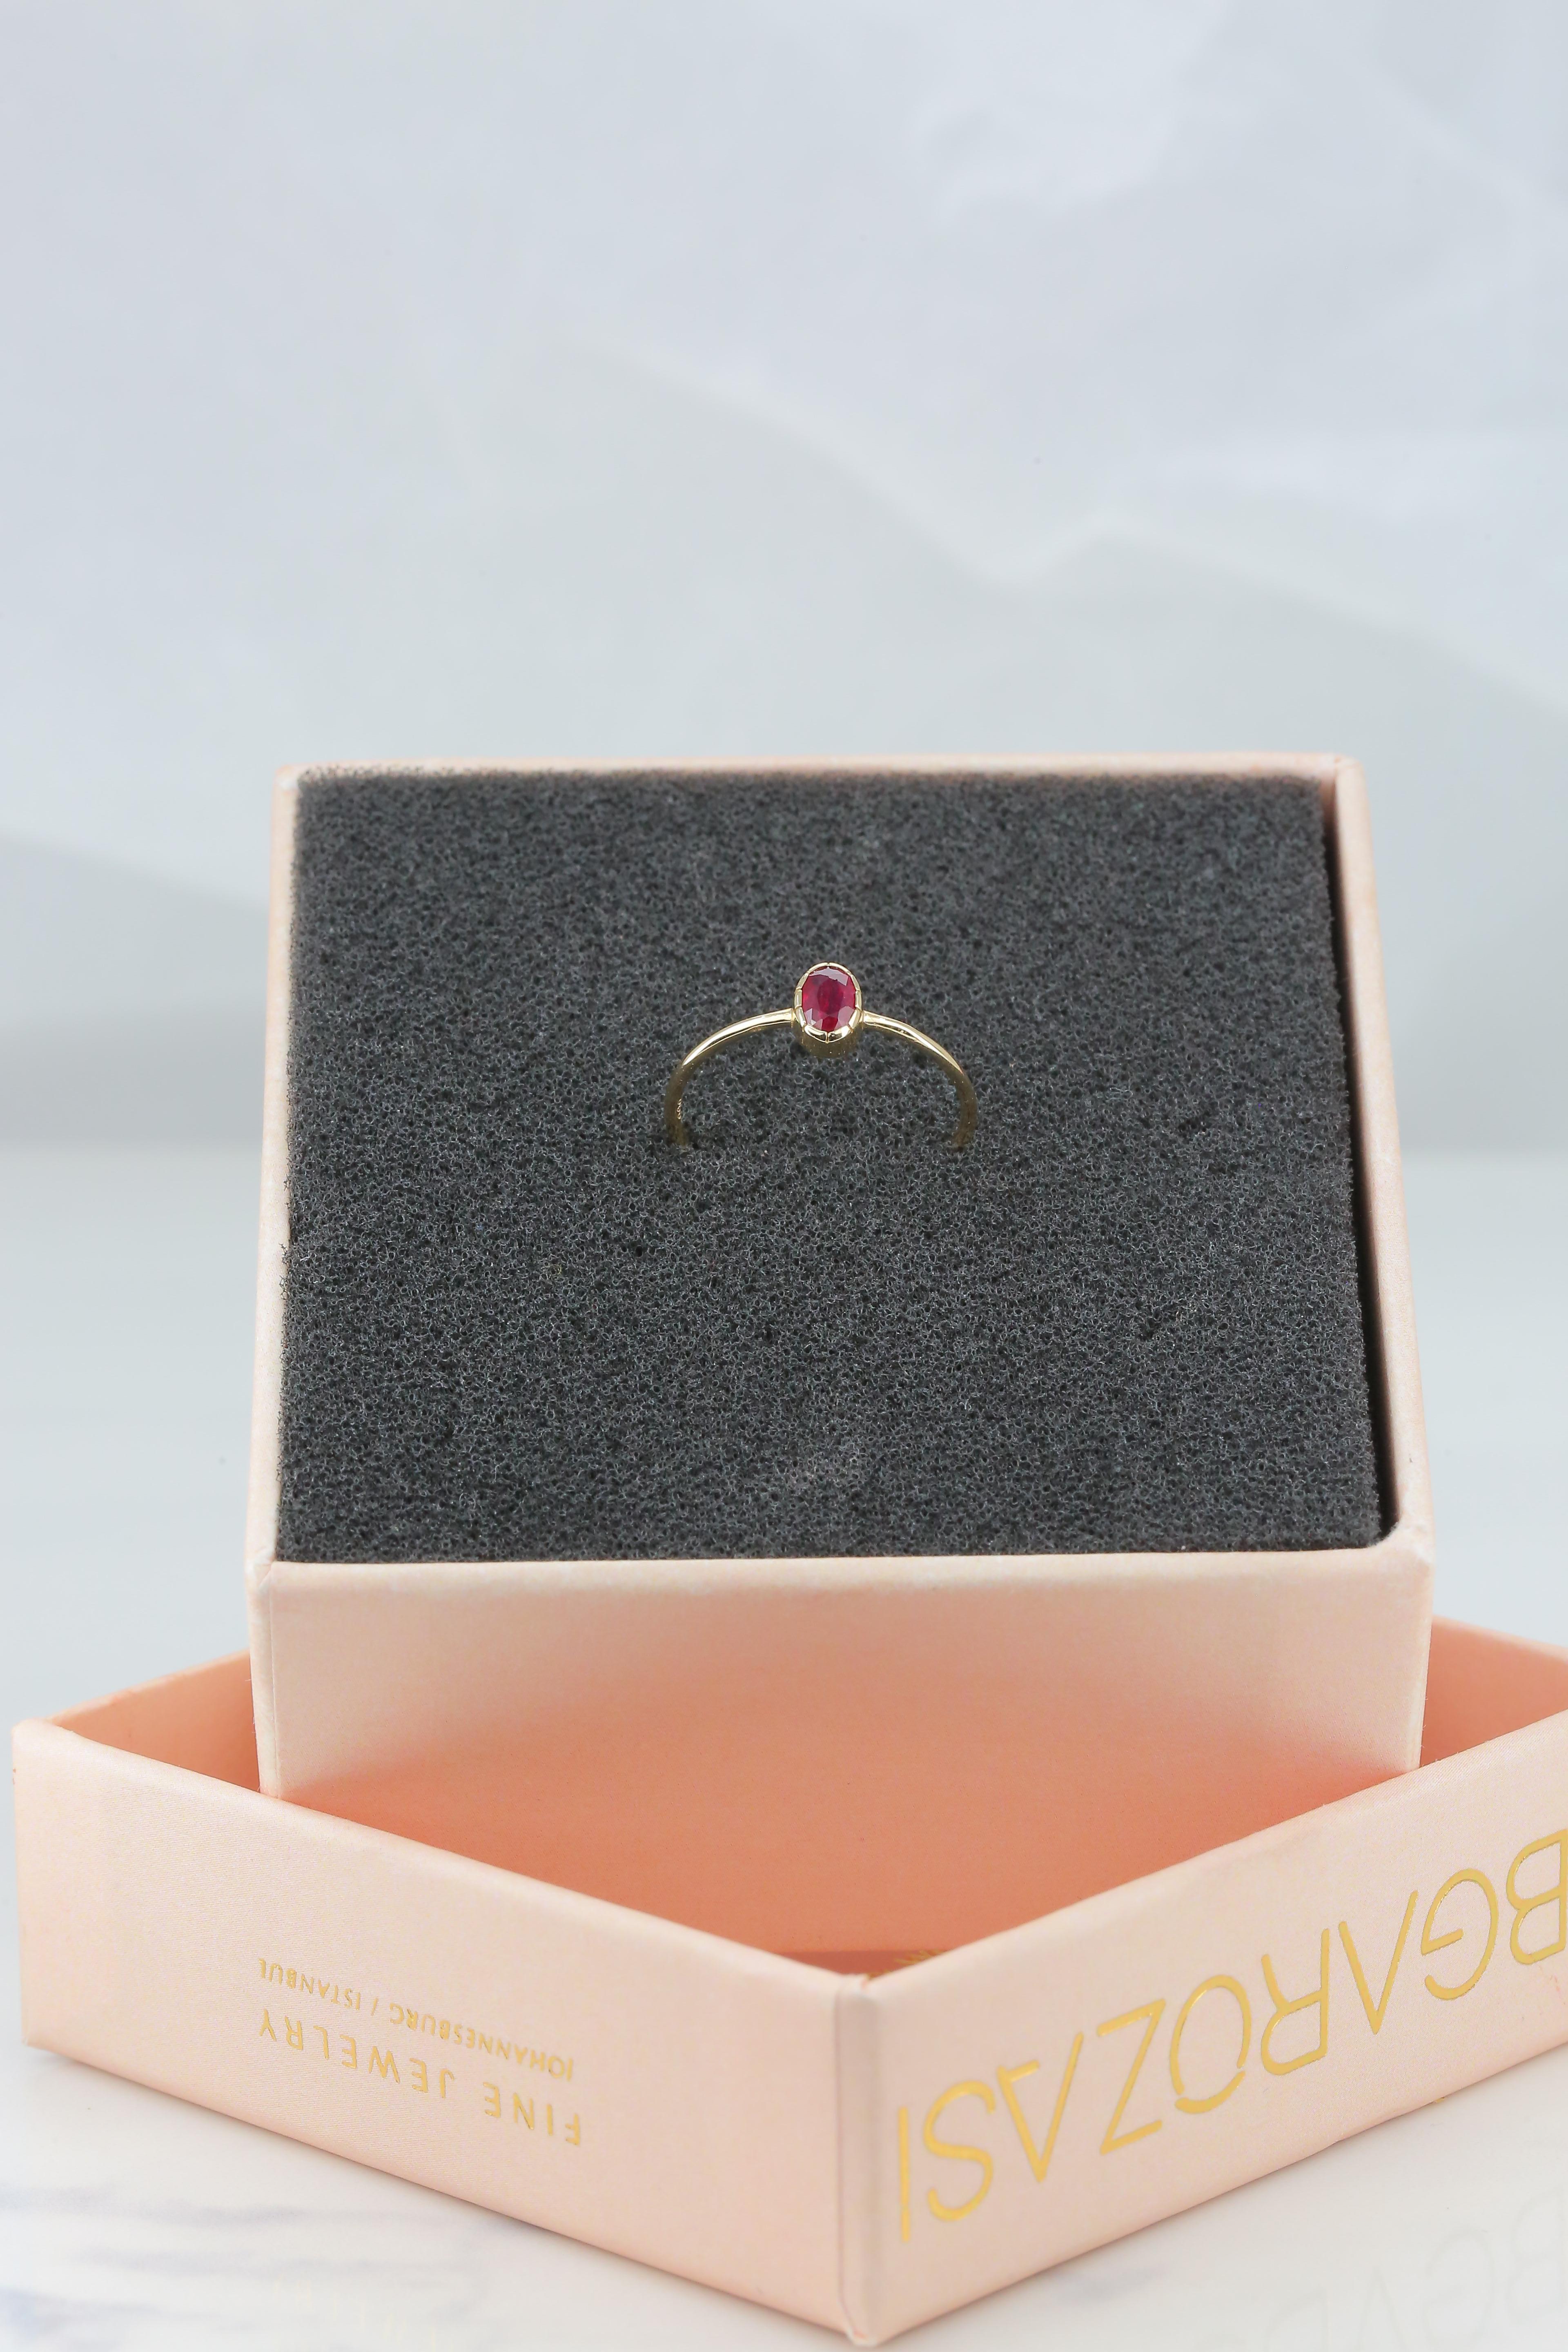 For Sale:  0.32 Ct Oval Cut Ruby 14K Gold Birthstone Ring, Casual Ring, Combinable Ring 9